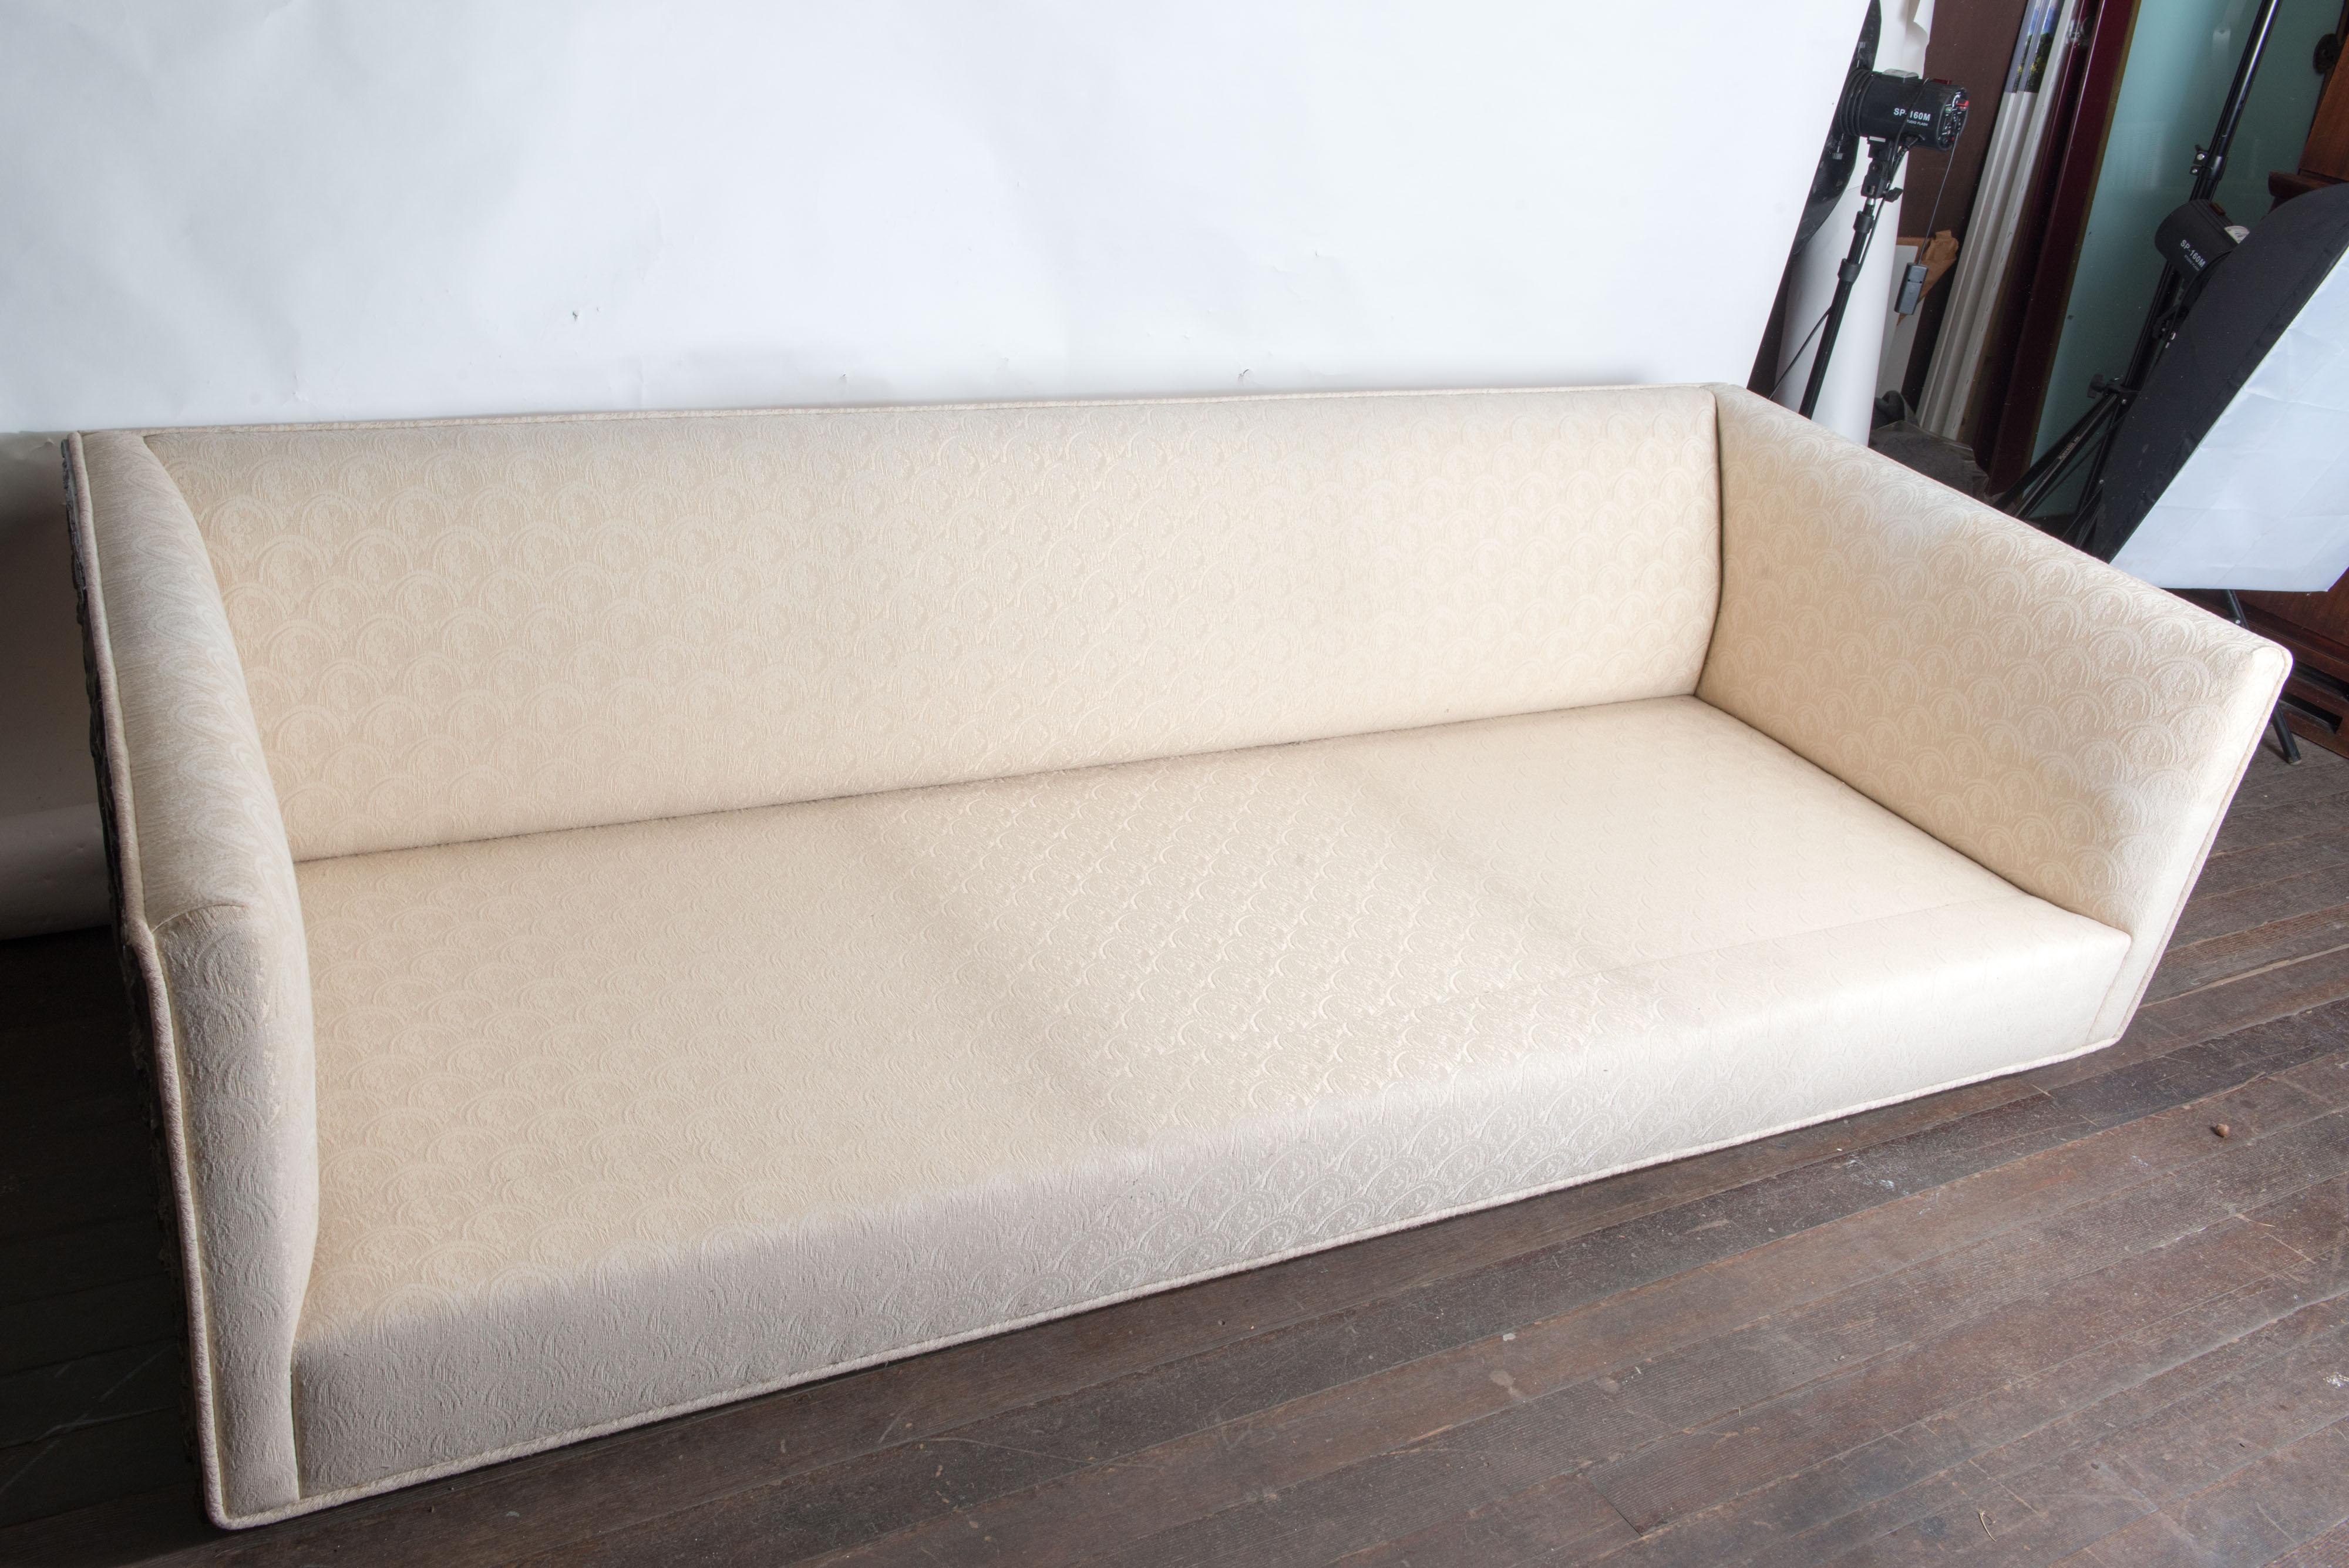 Fabric Adrian Pearsall Brutalist Style Sofa For Sale